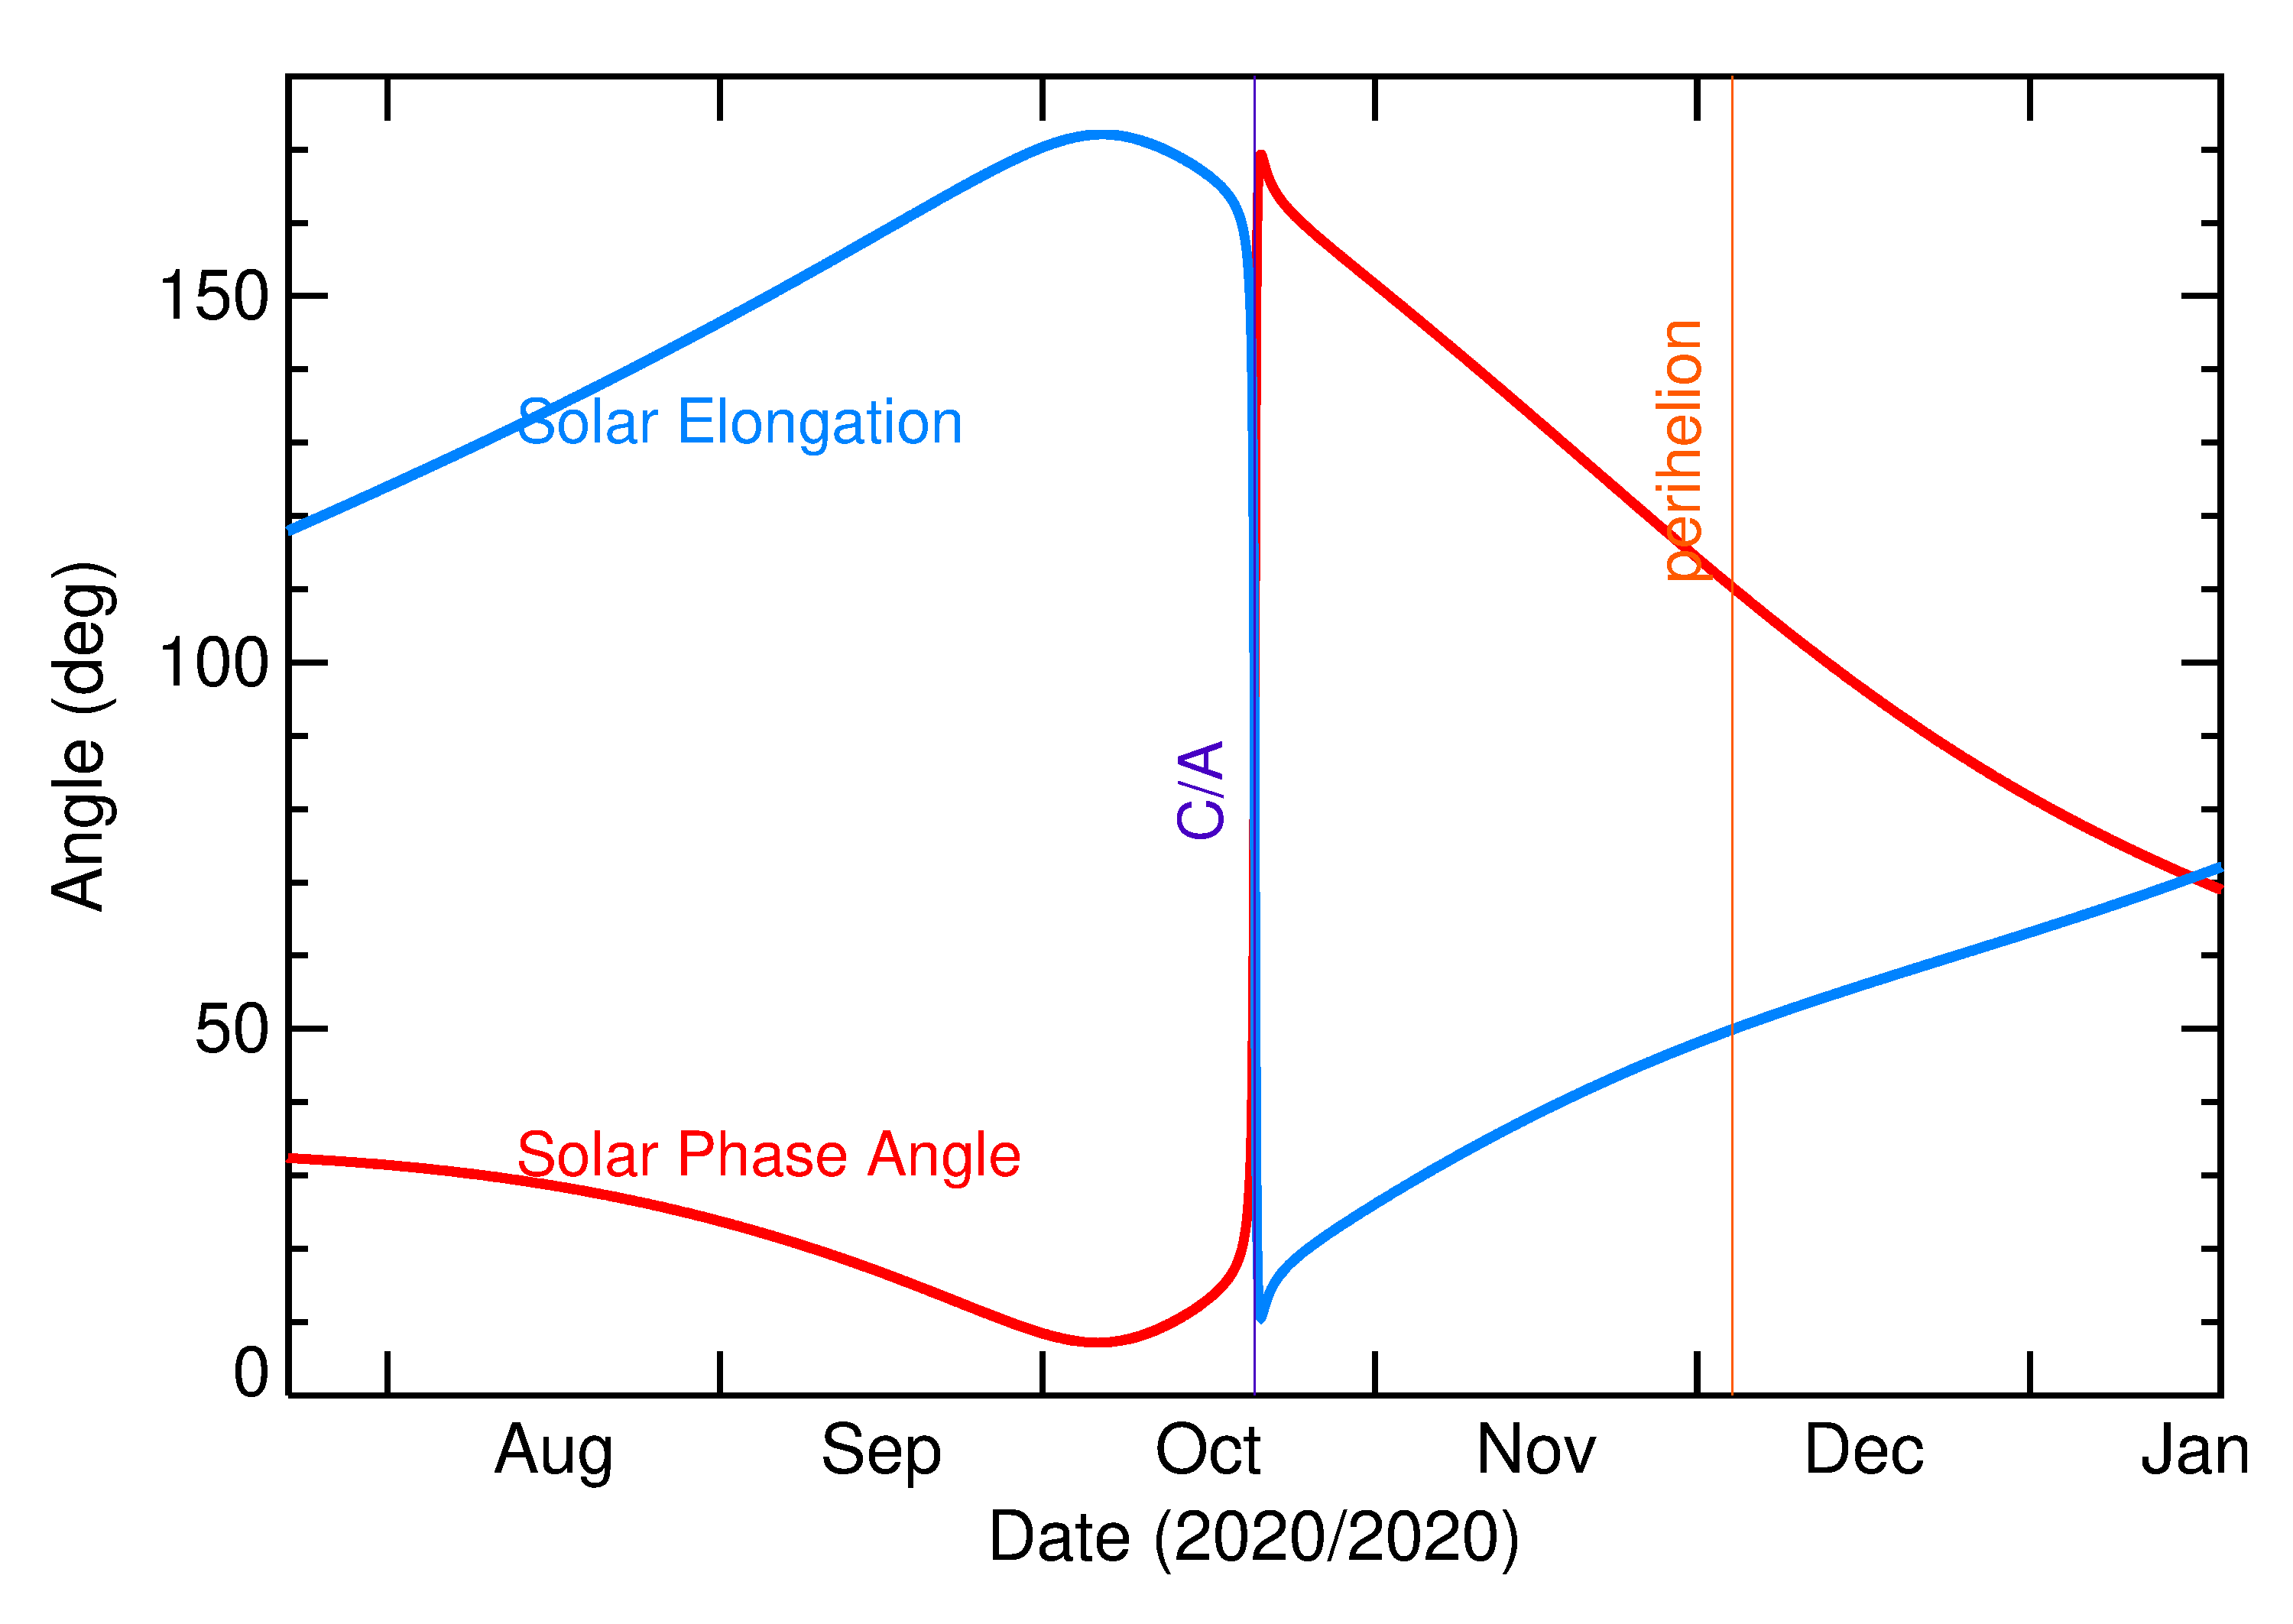 Solar Elongation and Solar Phase Angle of 2020 TF6 in the months around closest approach